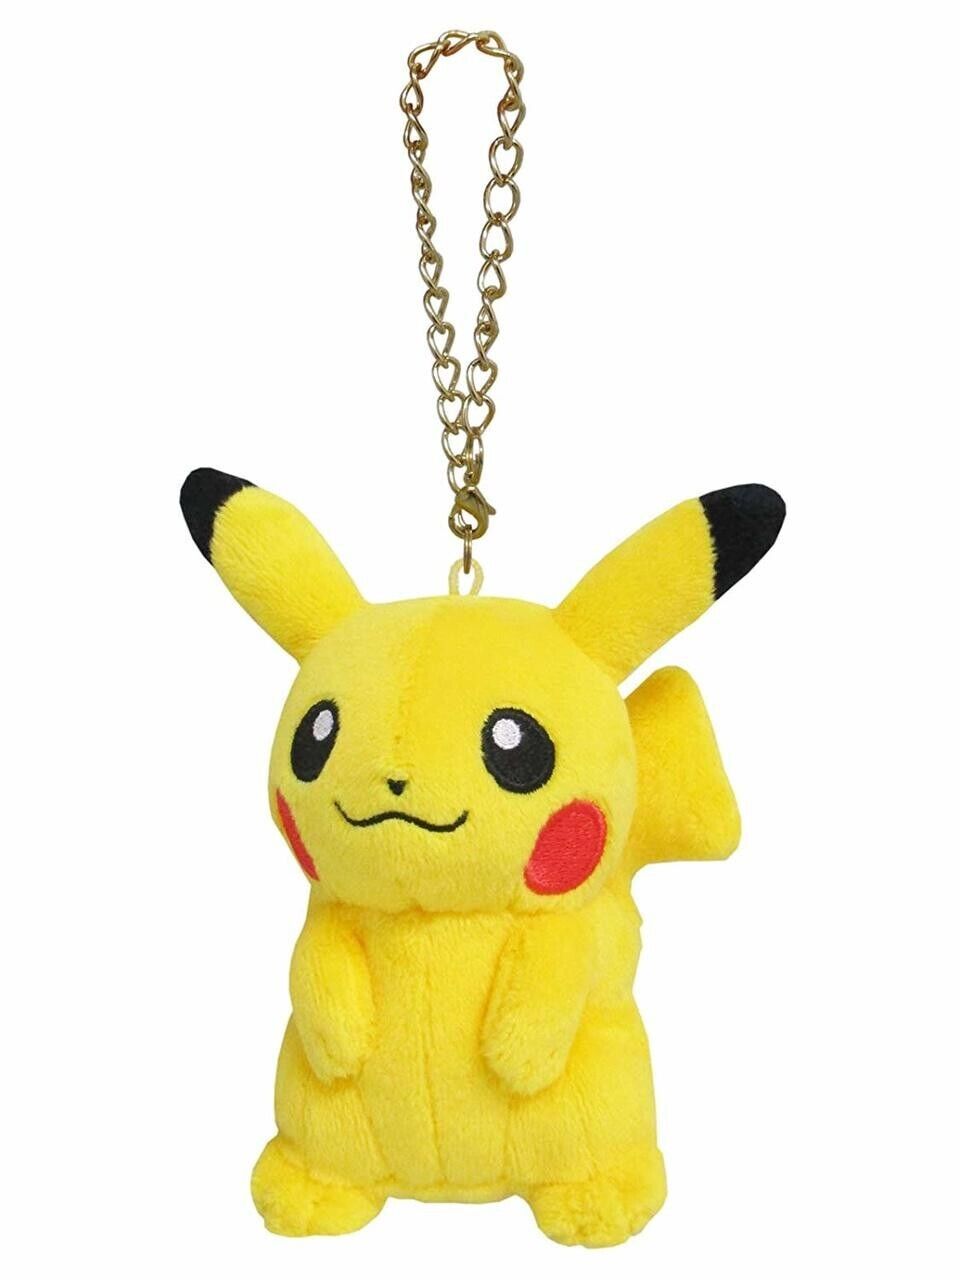 Small yellow pikachu plush with a gold chain.